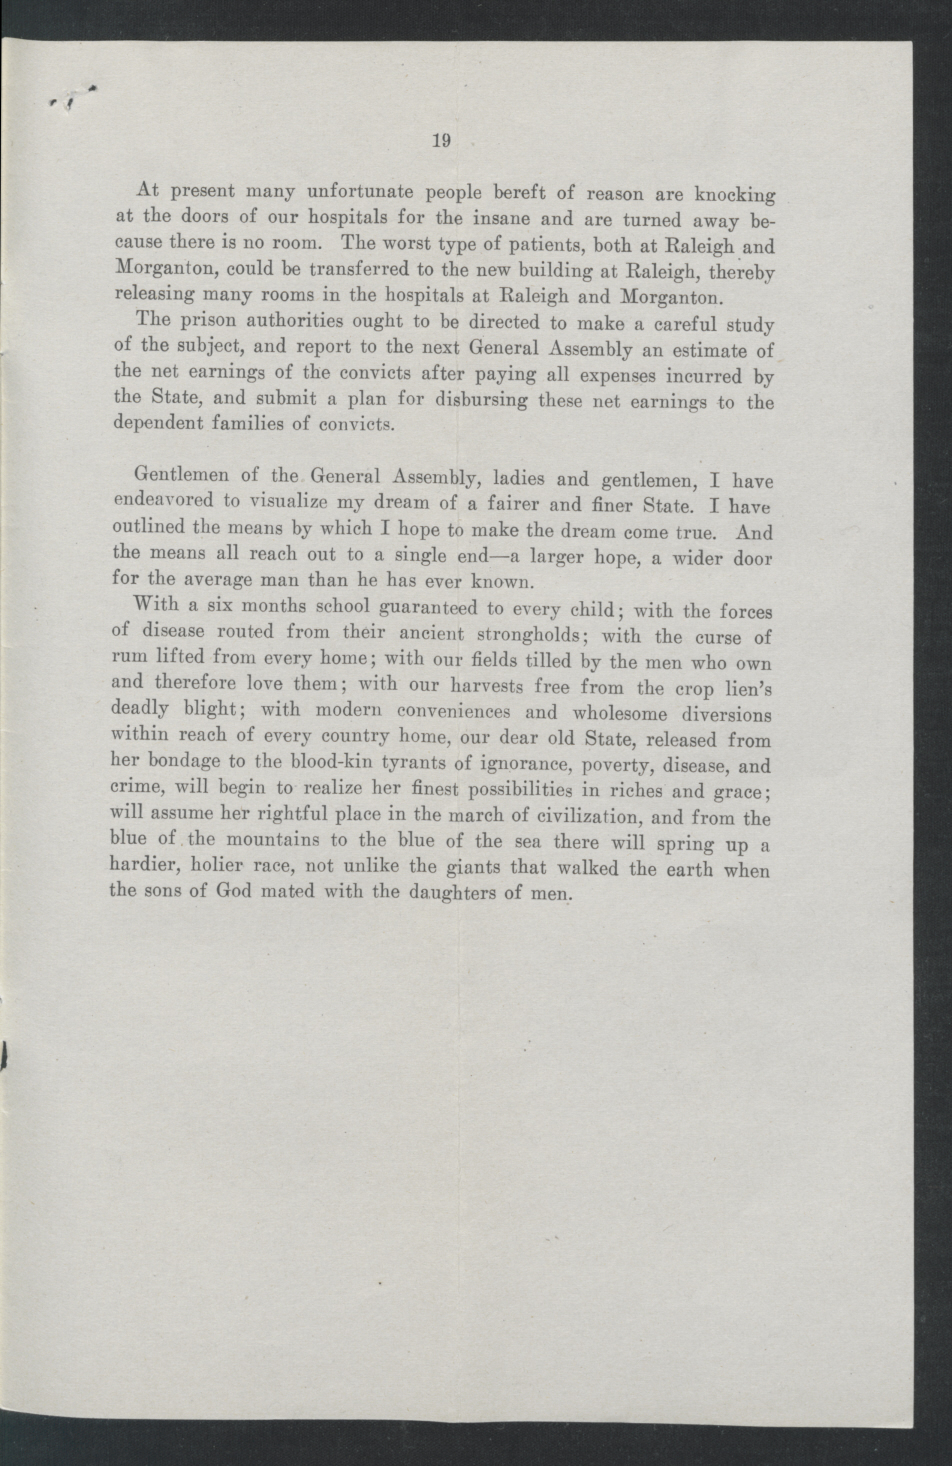 Inaugural Address of Governor Thomas W. Bickett to the General Assembly, January 11, 1917, page 17